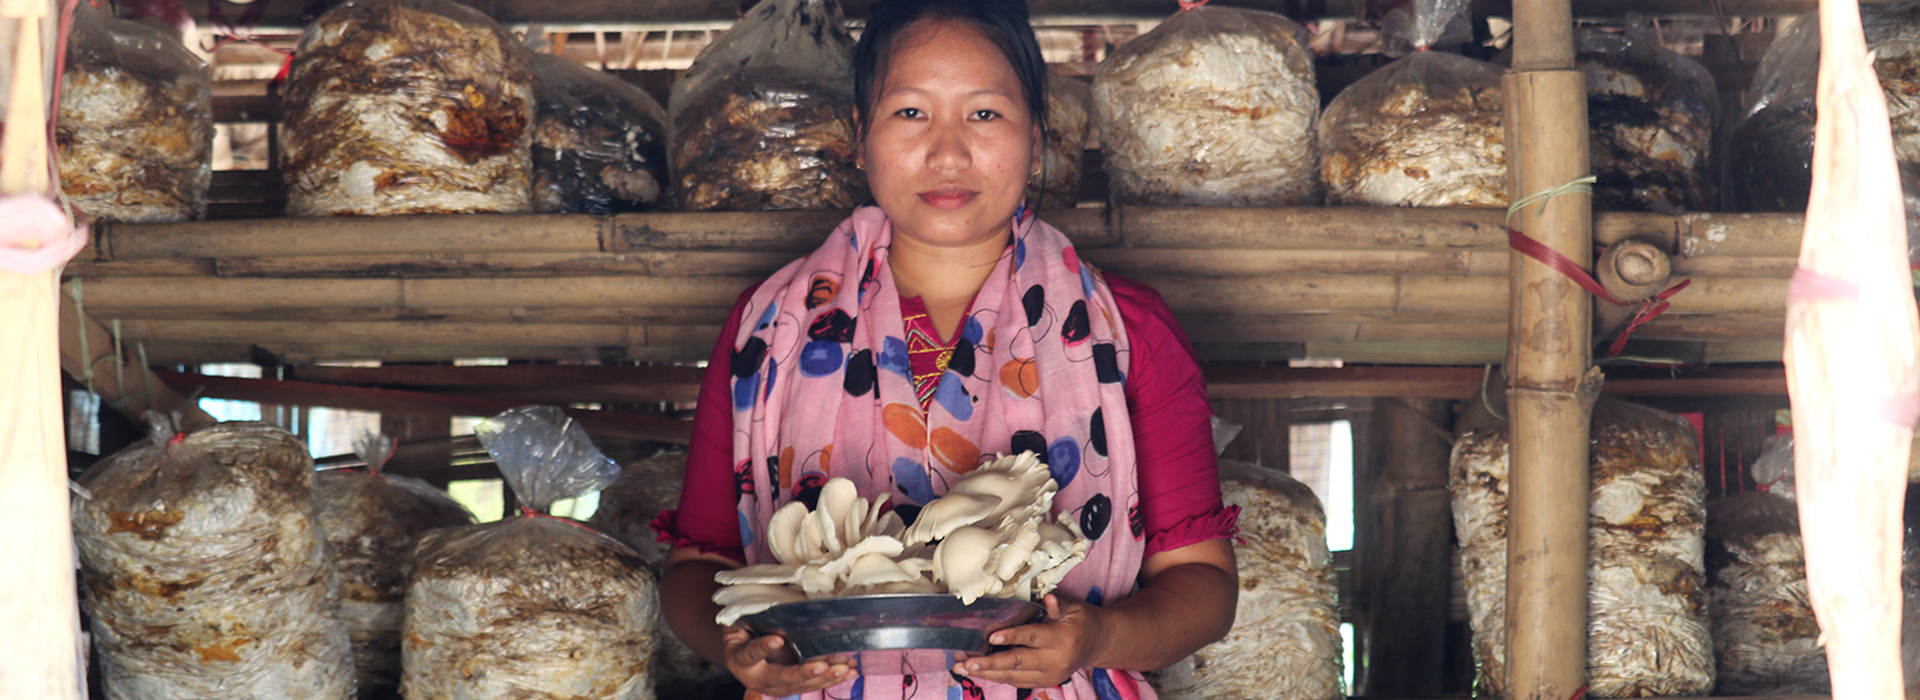 A woman holding a bowl of mushrooms.